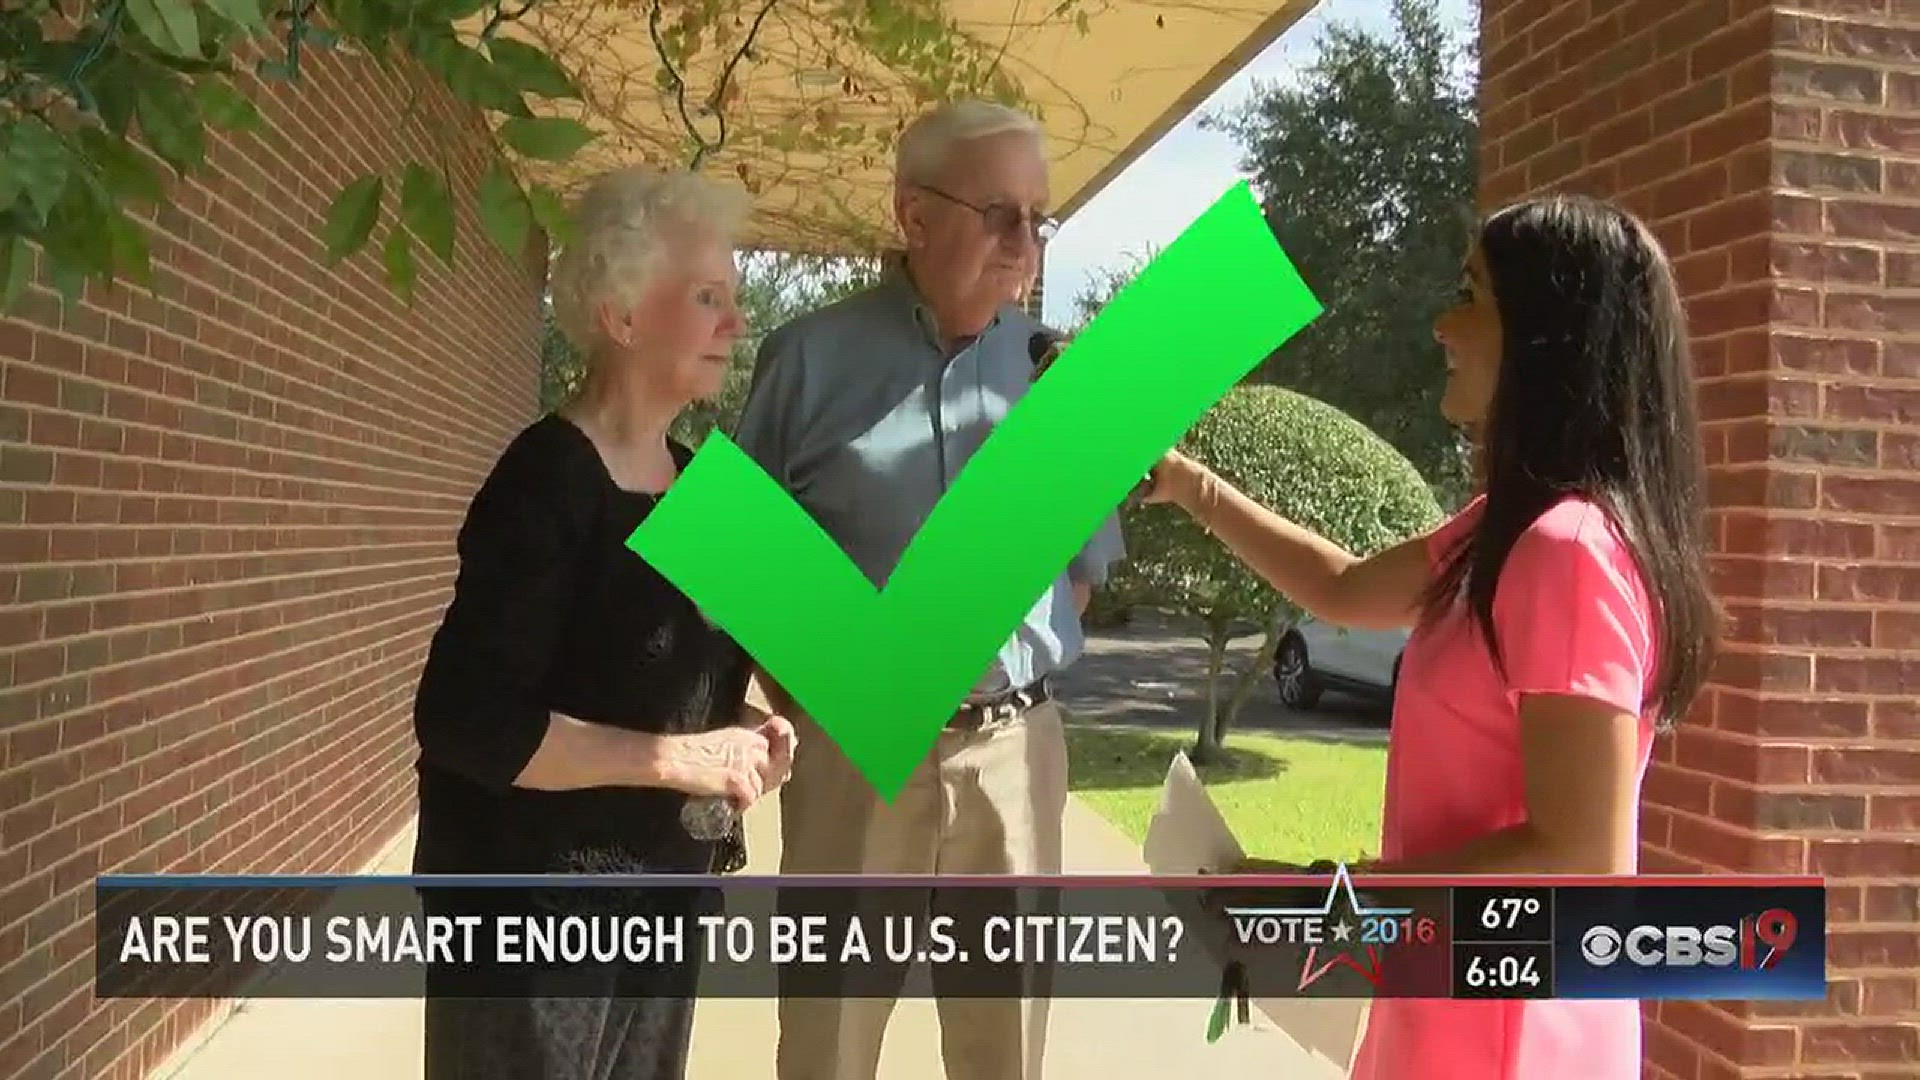 Are you smart enough to pass? CBS19's Jacquelin Sarkissian put some East Texans to the test.